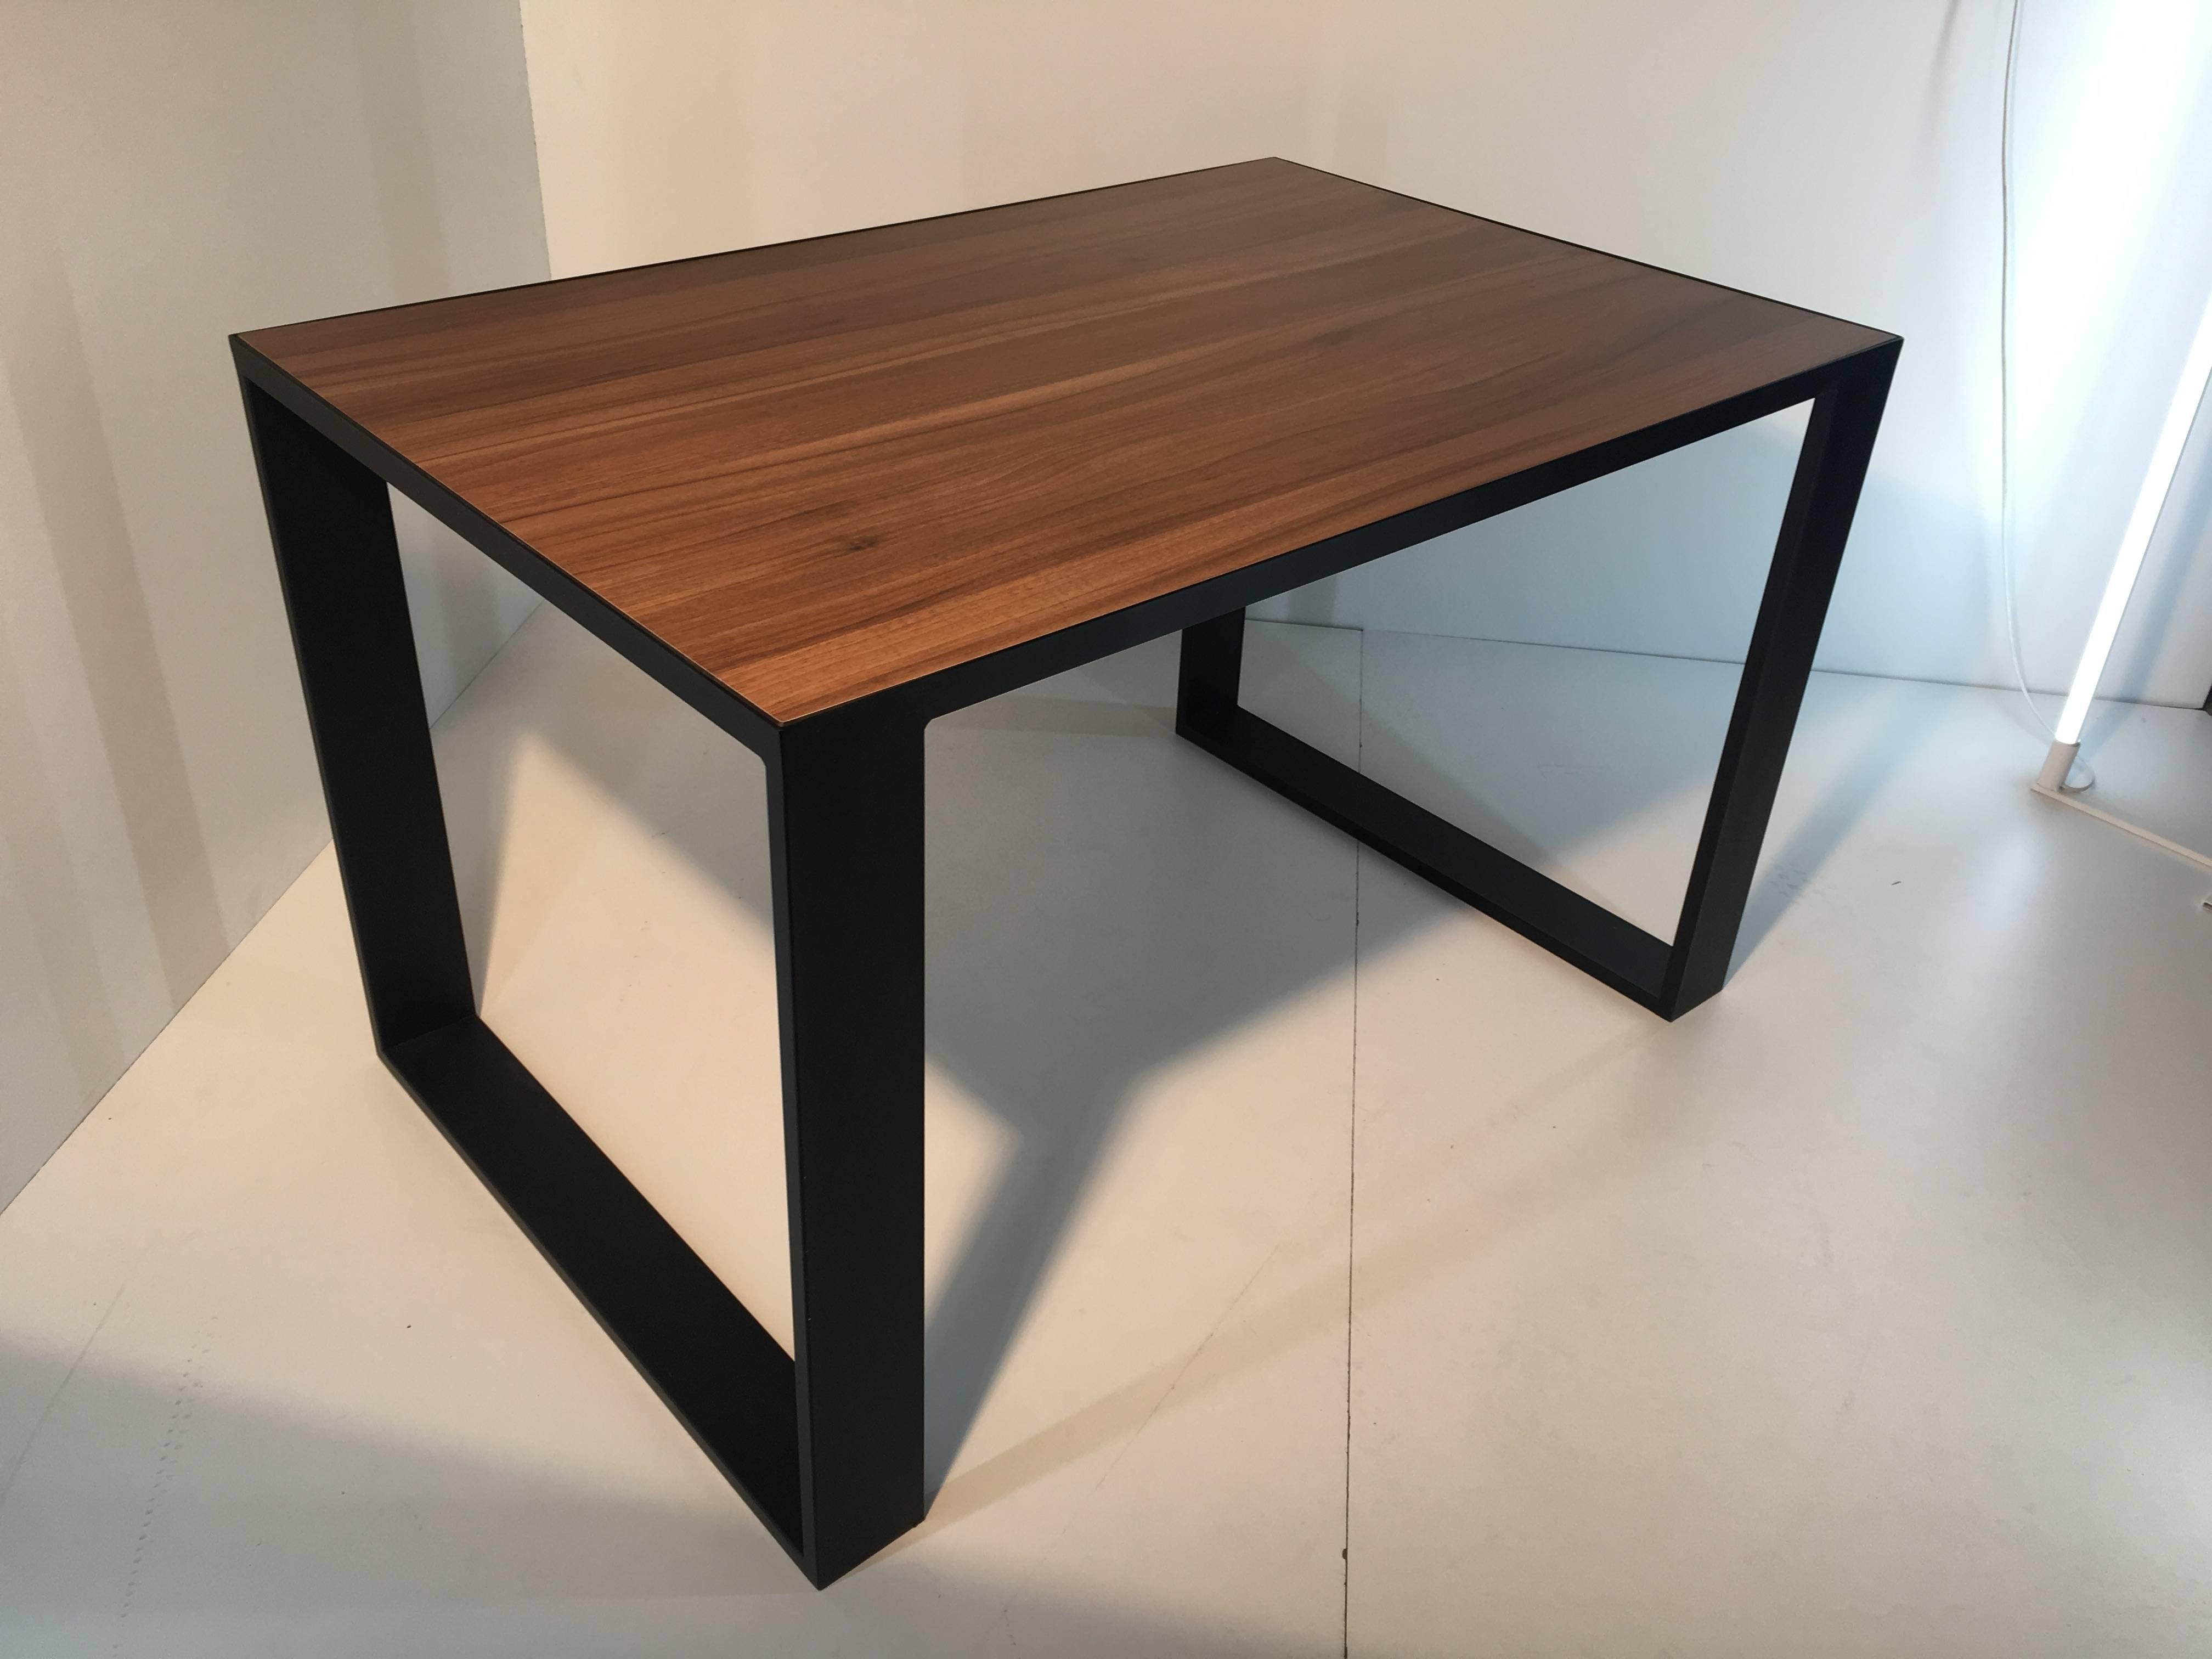 Rectangular iron cube table with embedded wood top. Dinner table. Desk table 

Frame material: Extruded and hand-welded iron rods
Frame finish: Black 
Iron rods dimensions: 3.93in x 0.78in
Top: 0.7in wood


Bespoke and handmade, available to